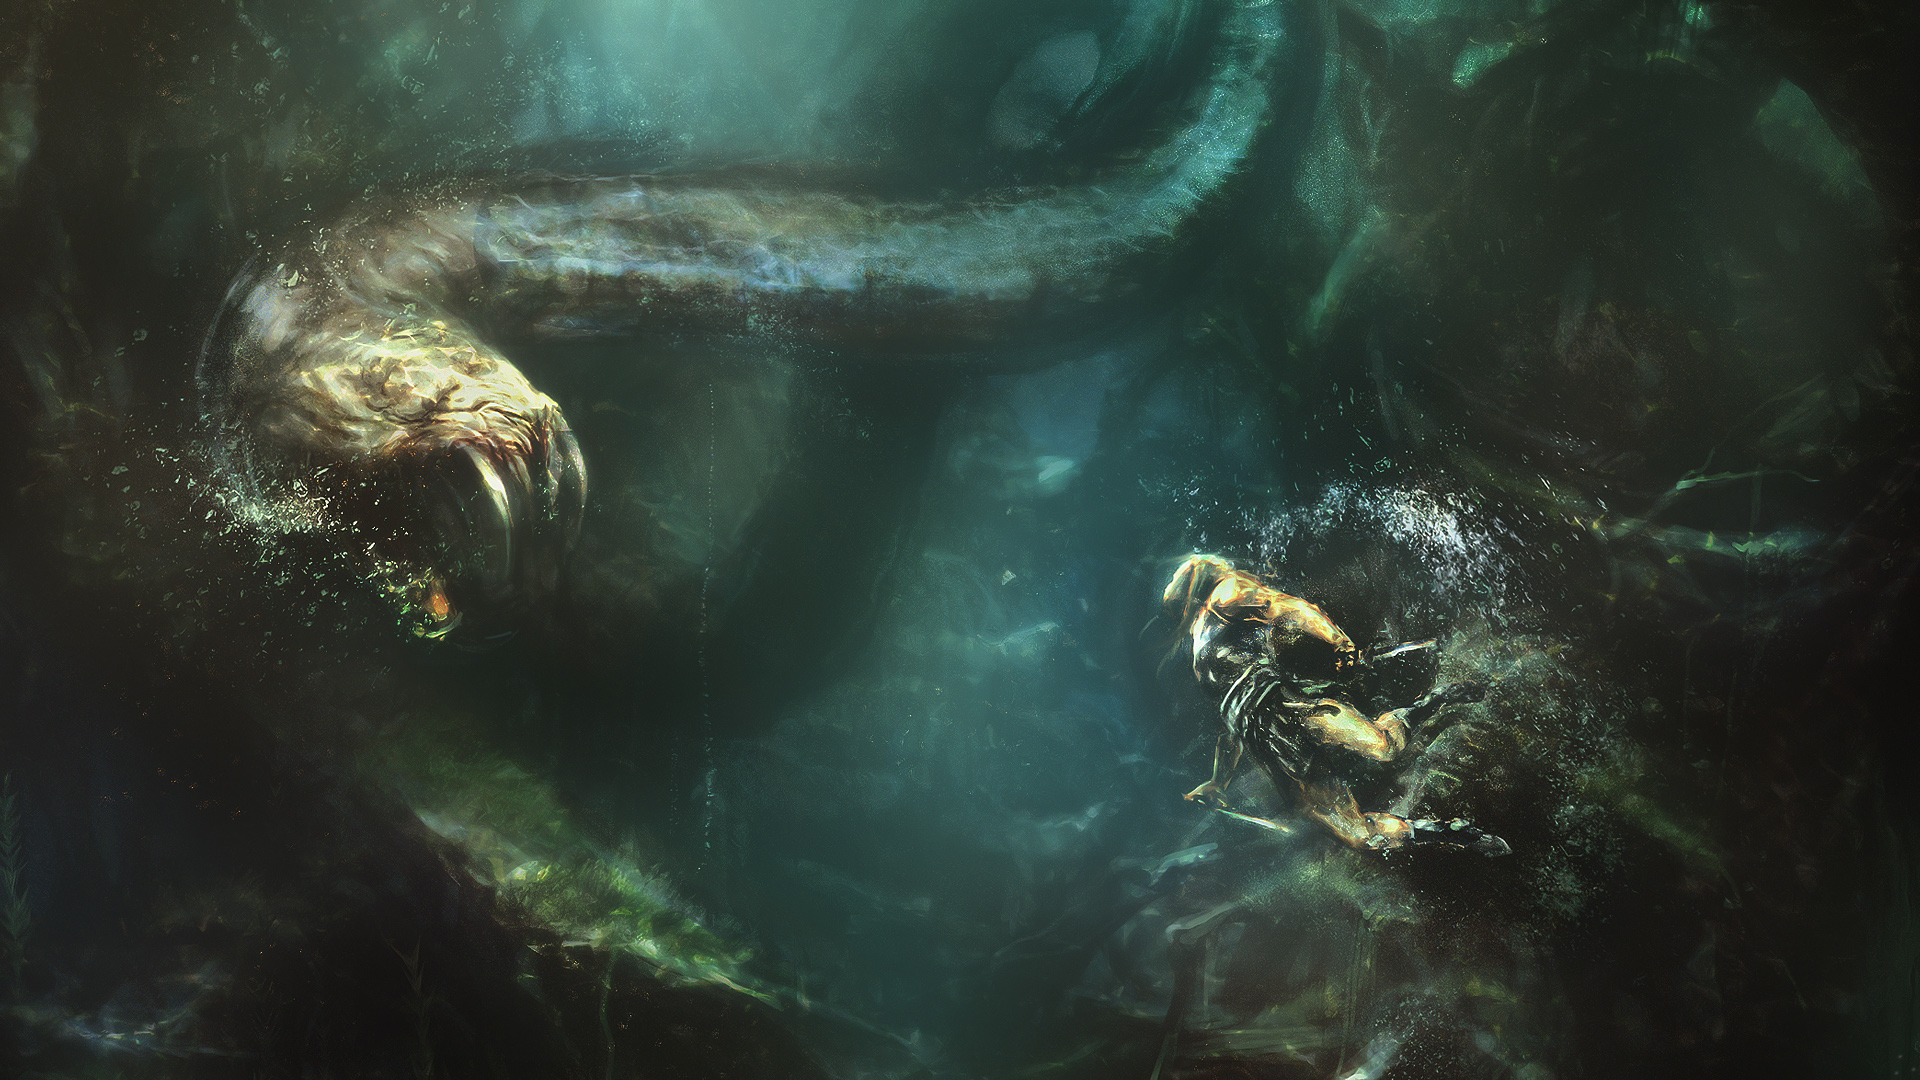 A mesmerizing fantasy scene featuring a formidable sea monster in the Beowulf TG desktop wallpaper.